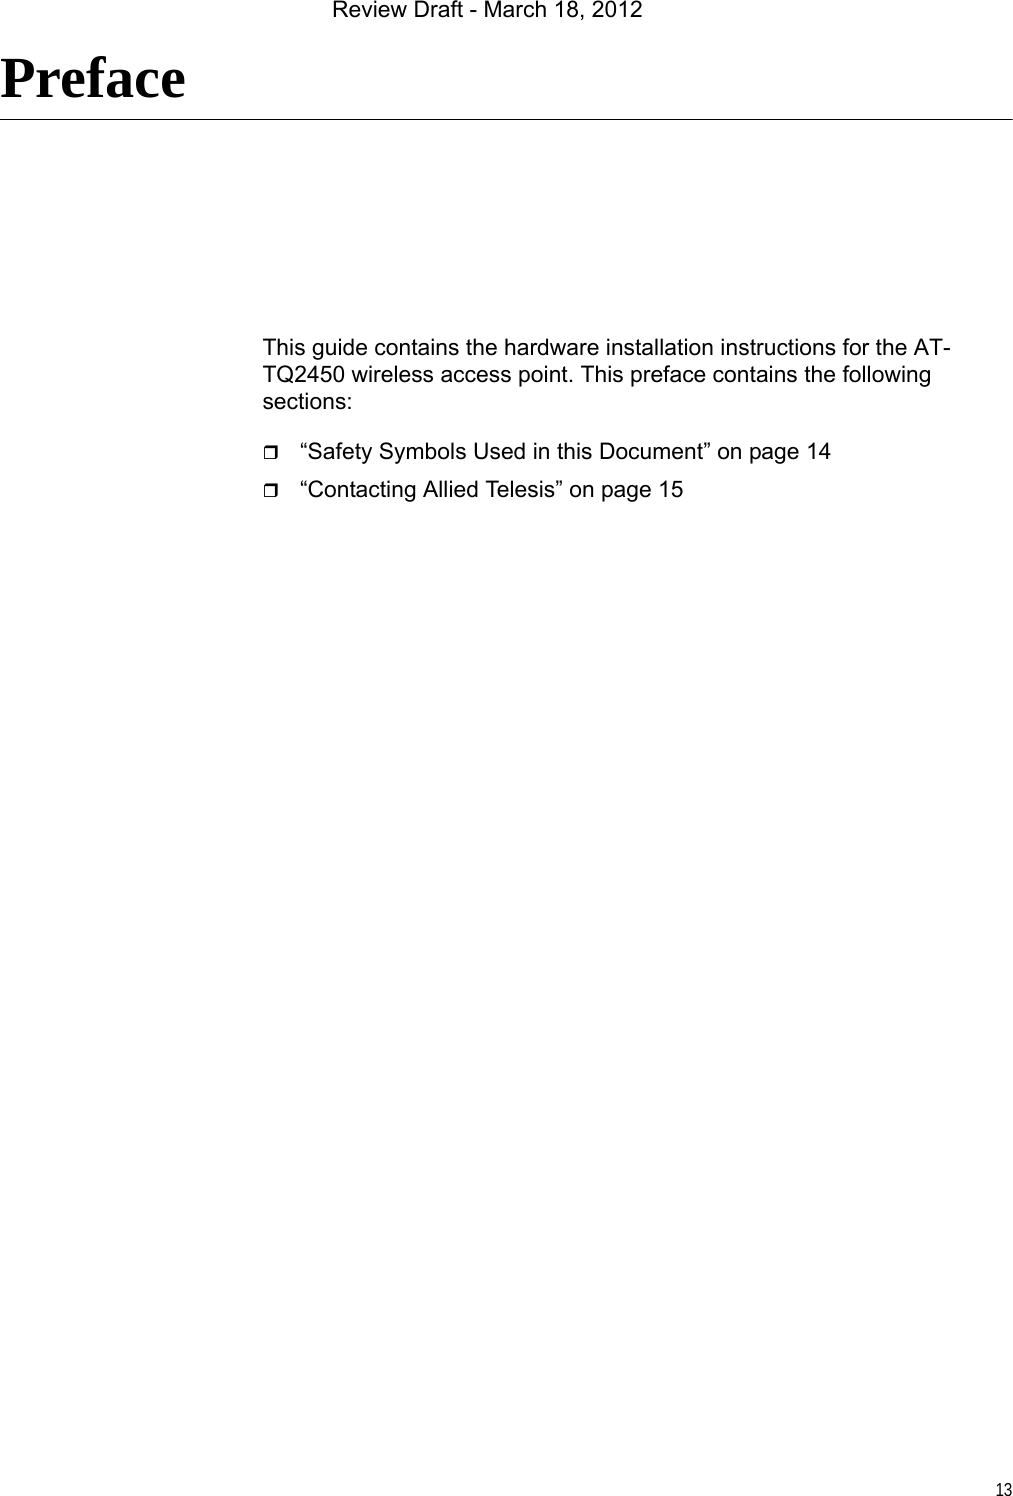 13PrefaceThis guide contains the hardware installation instructions for the AT-TQ2450 wireless access point. This preface contains the following sections:“Safety Symbols Used in this Document” on page 14“Contacting Allied Telesis” on page 15Review Draft - March 18, 2012